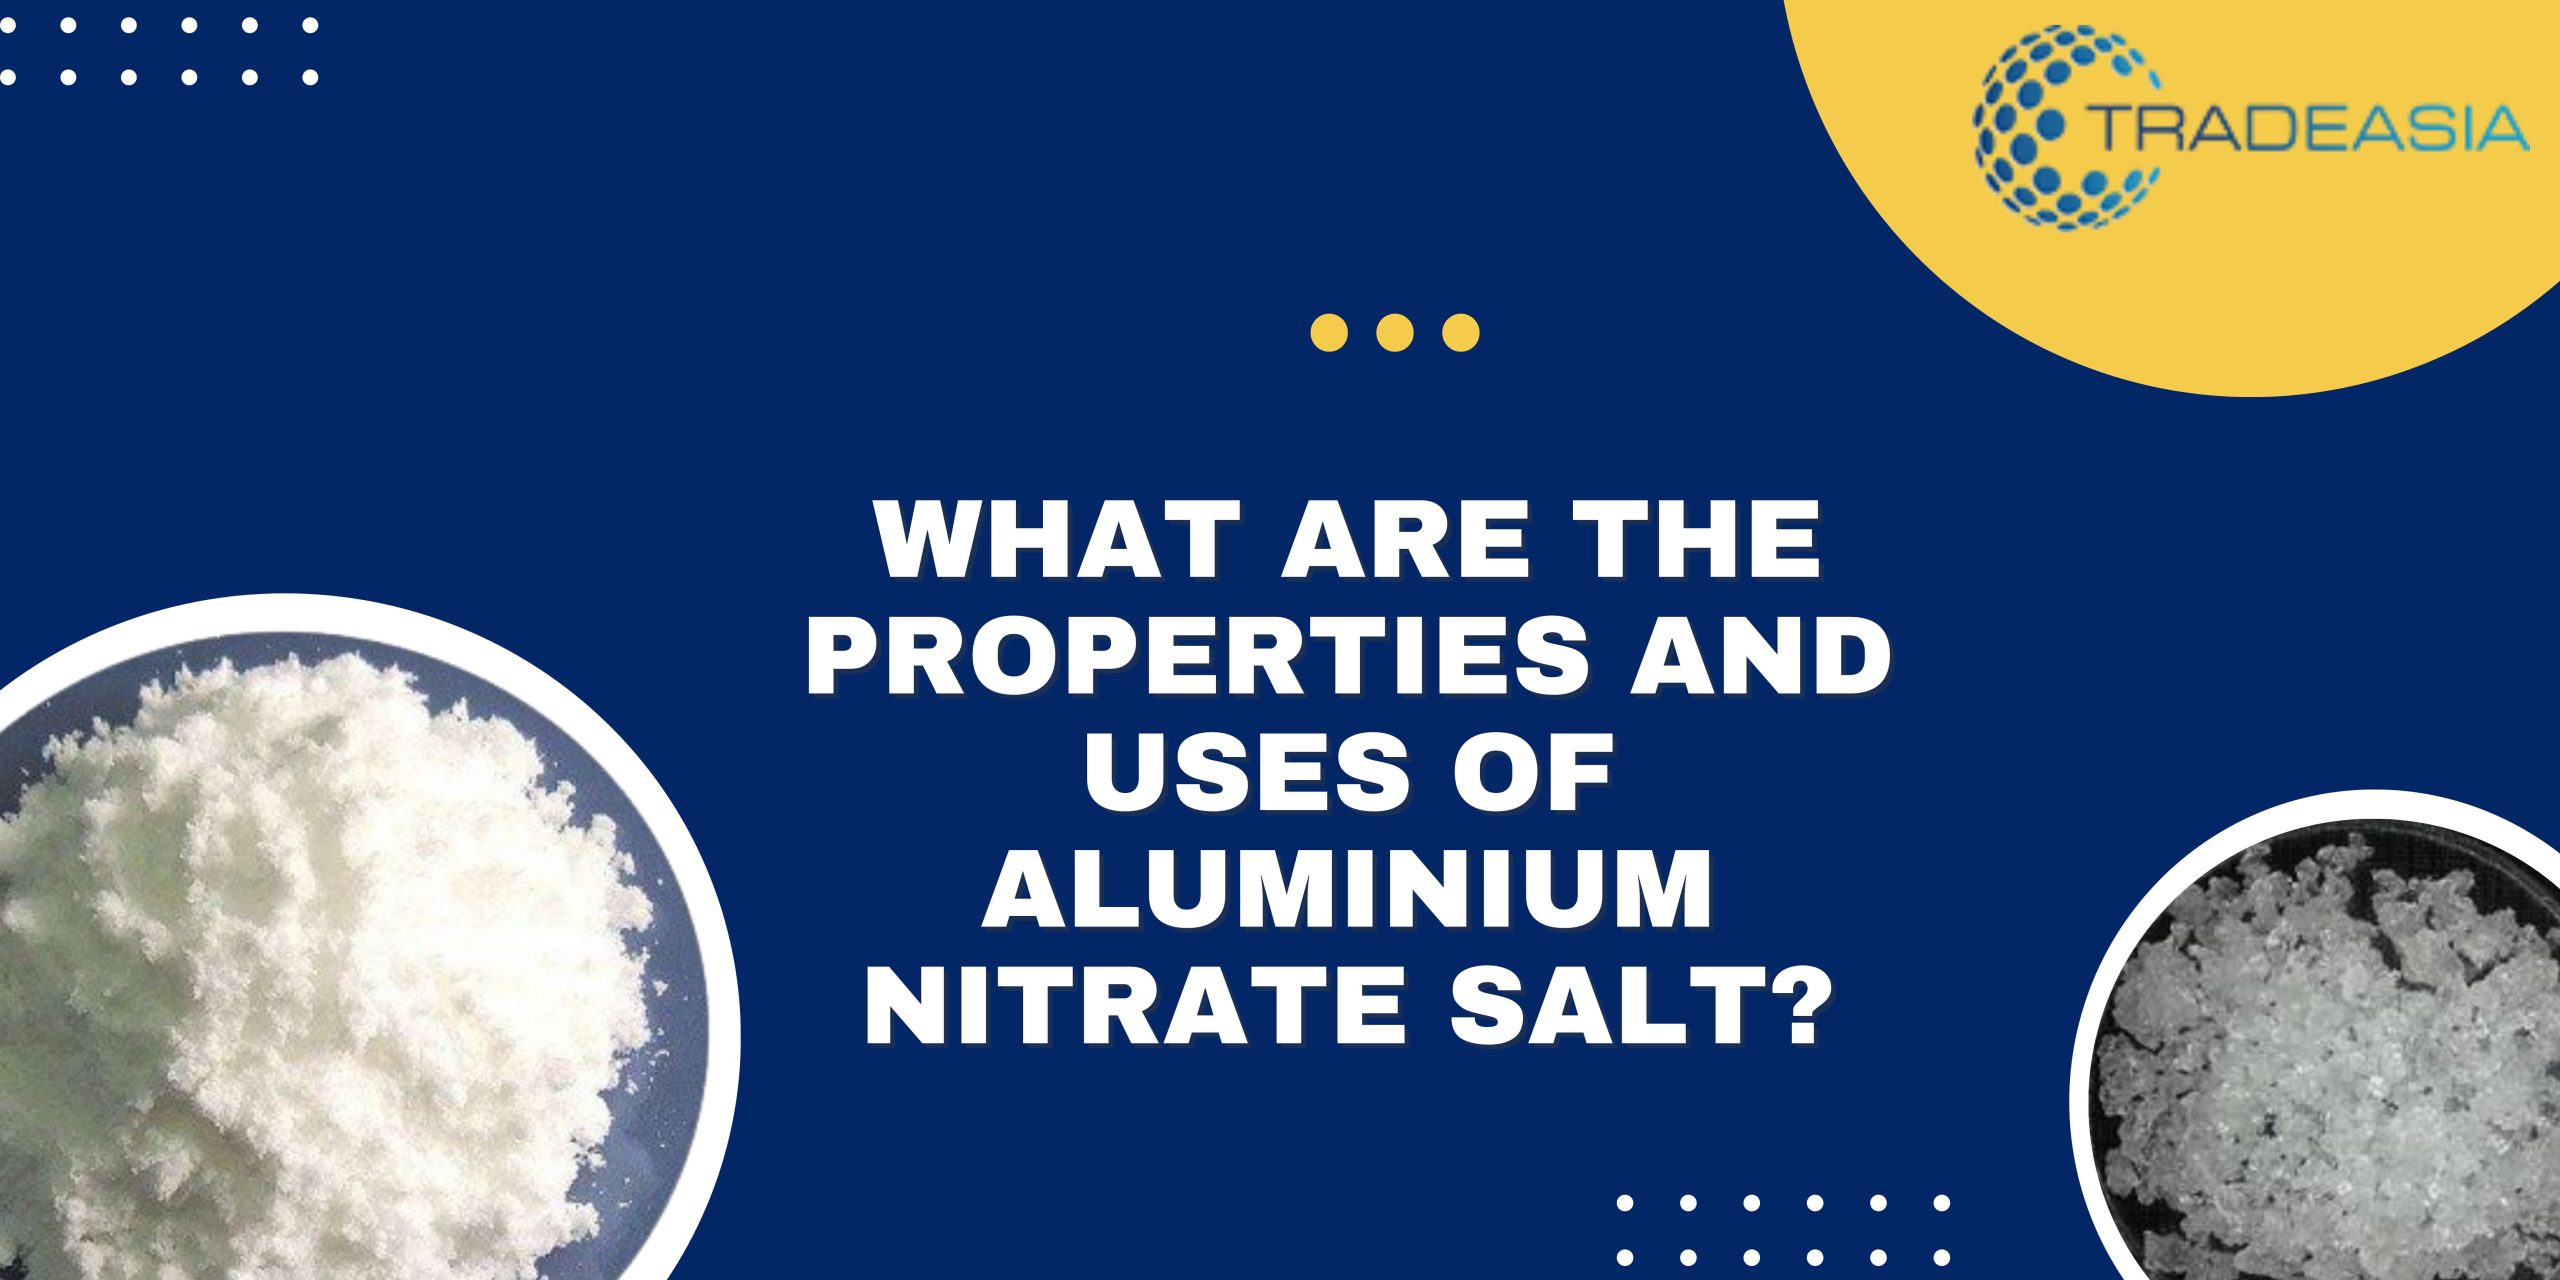 What Are the Properties and Uses of Aluminium Nitrate Salt?